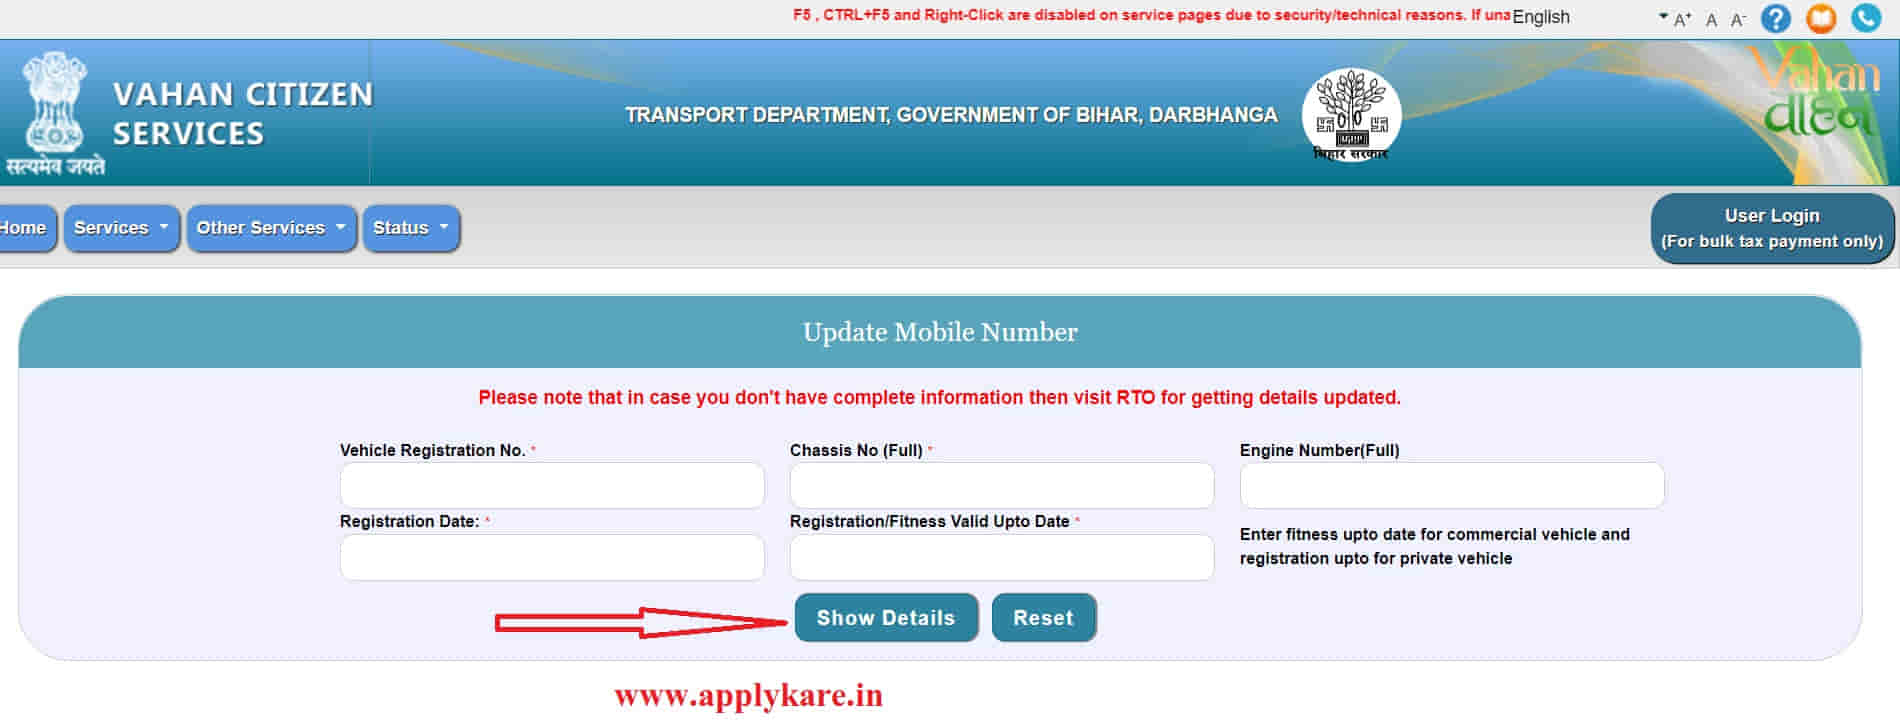 vehicle rc book me mobile number update kaise kare